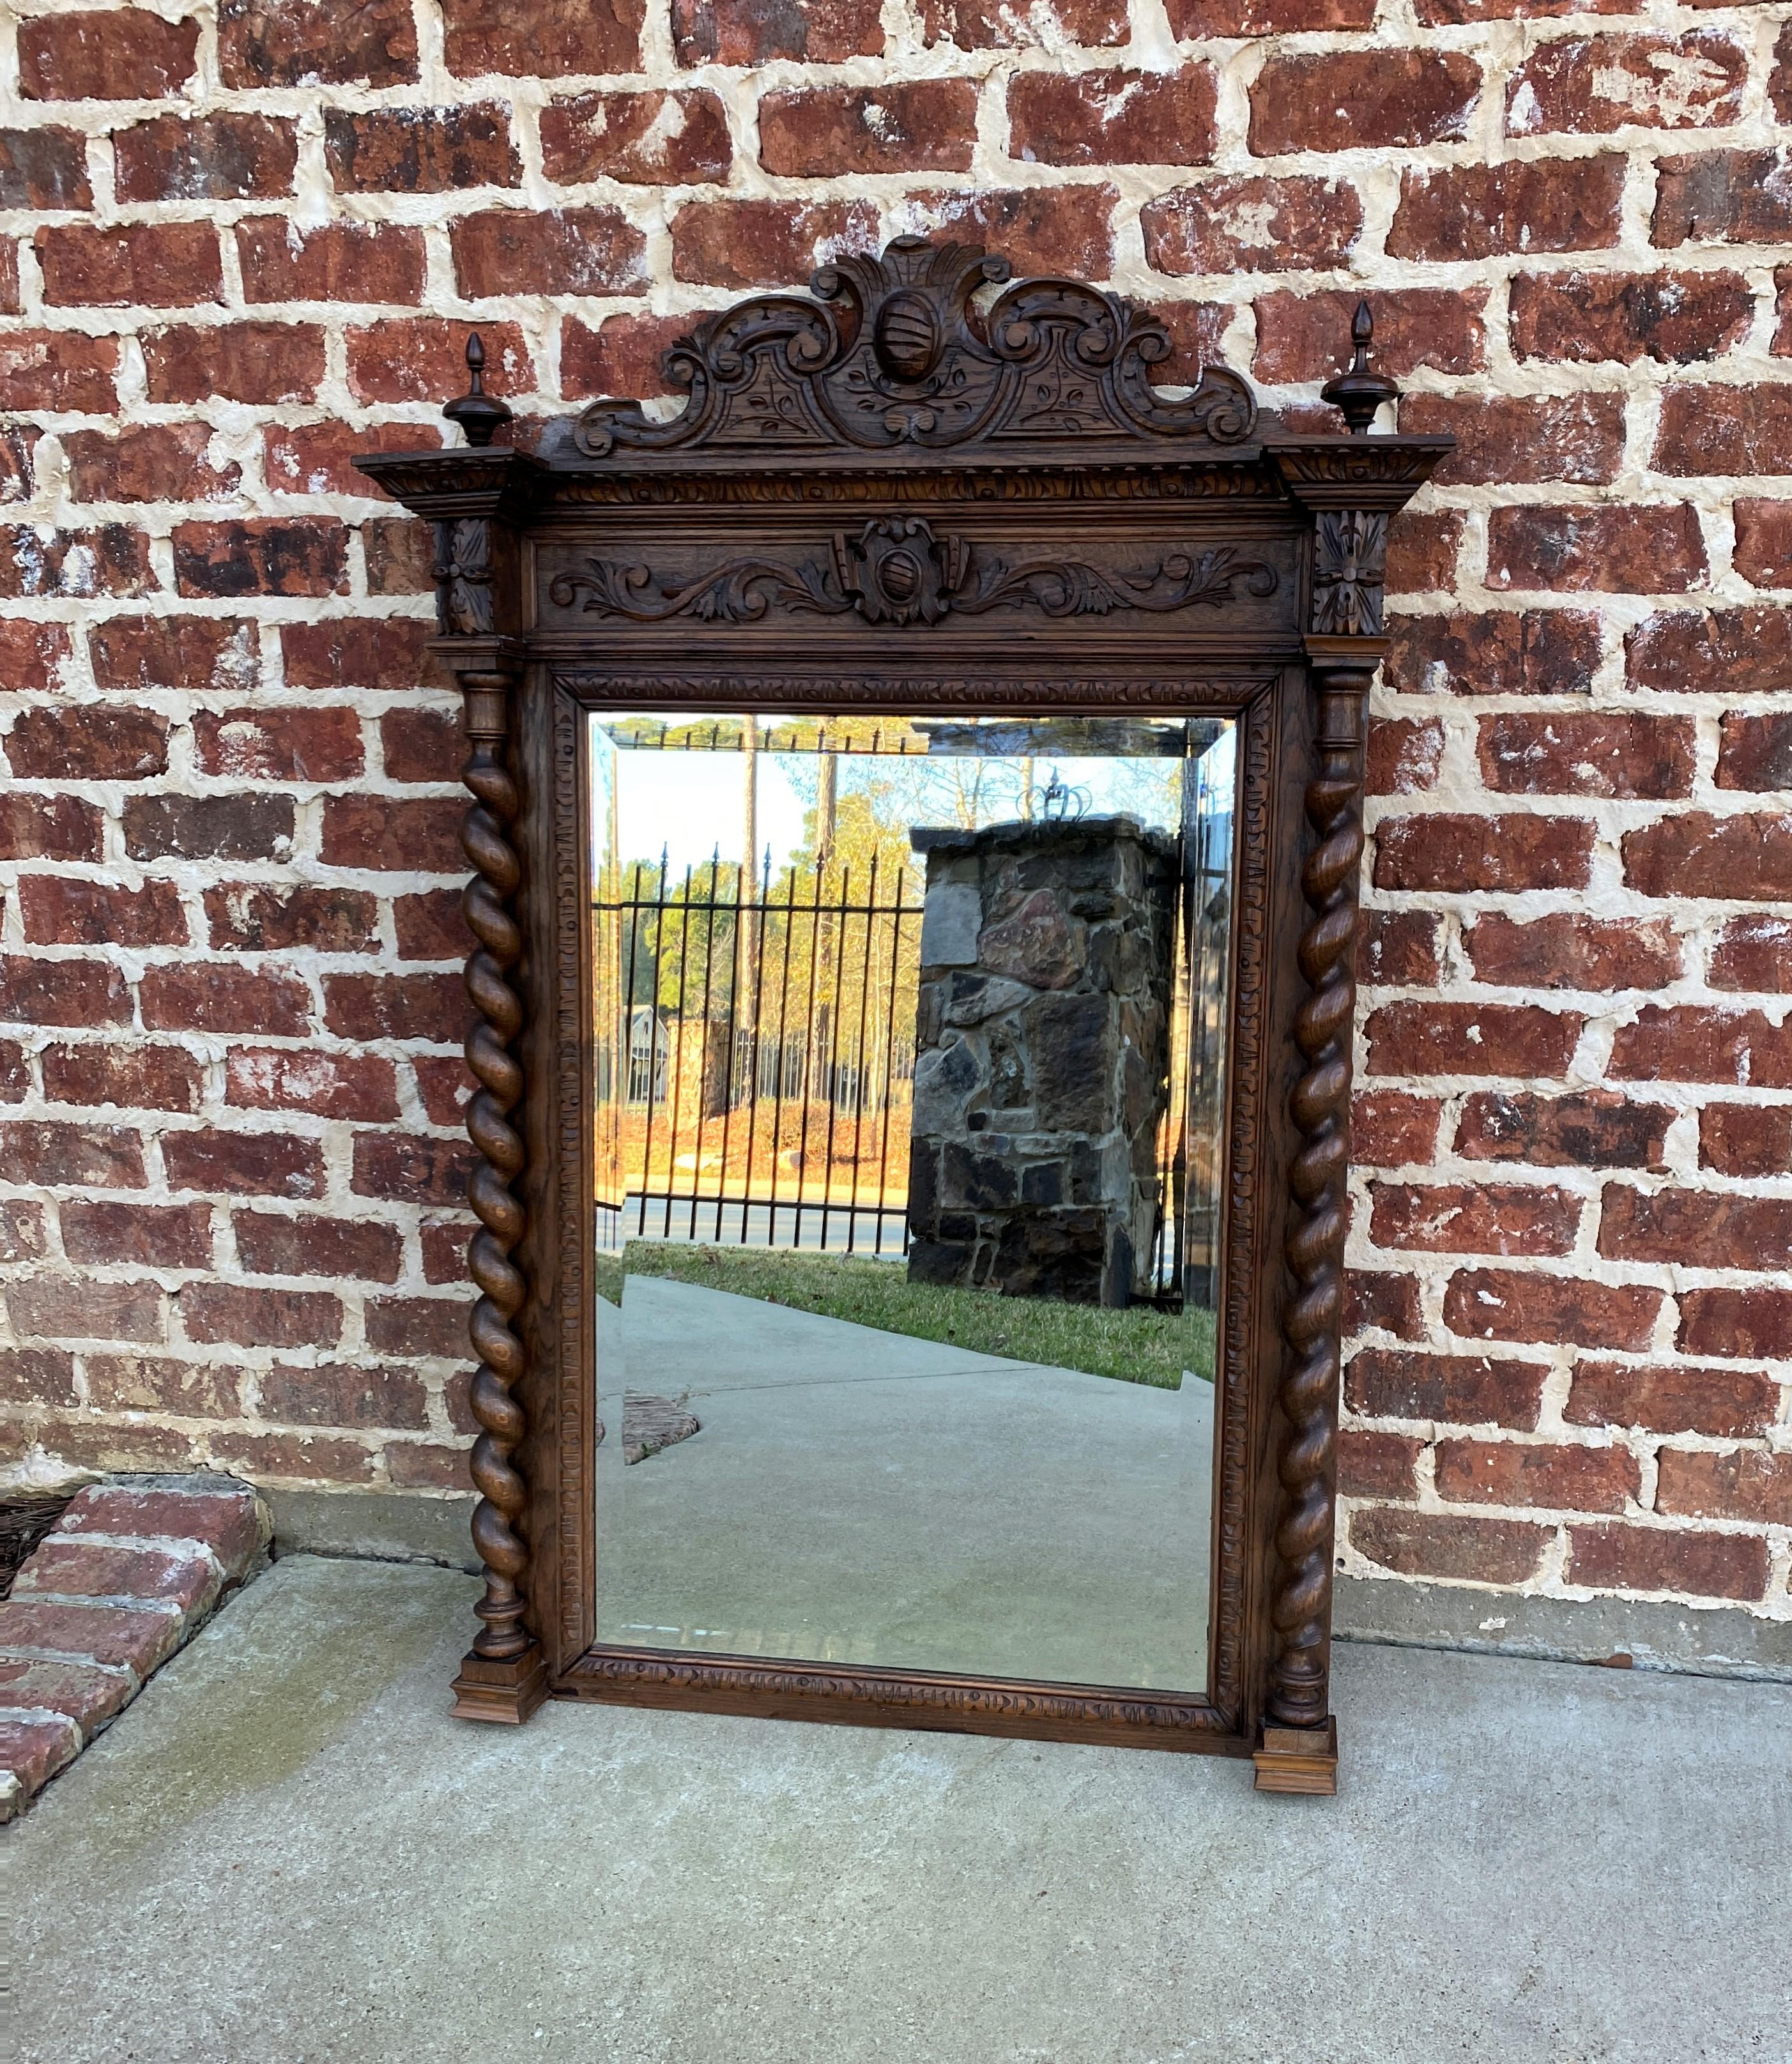 Exquisite antique French carved oak large framed rectangular beveled wall pier mantel mirror~~barley twist posts~~c. 1880s
 
Popular Renaissance Revival style~~traditional and timeless~~large mirror with 1.25